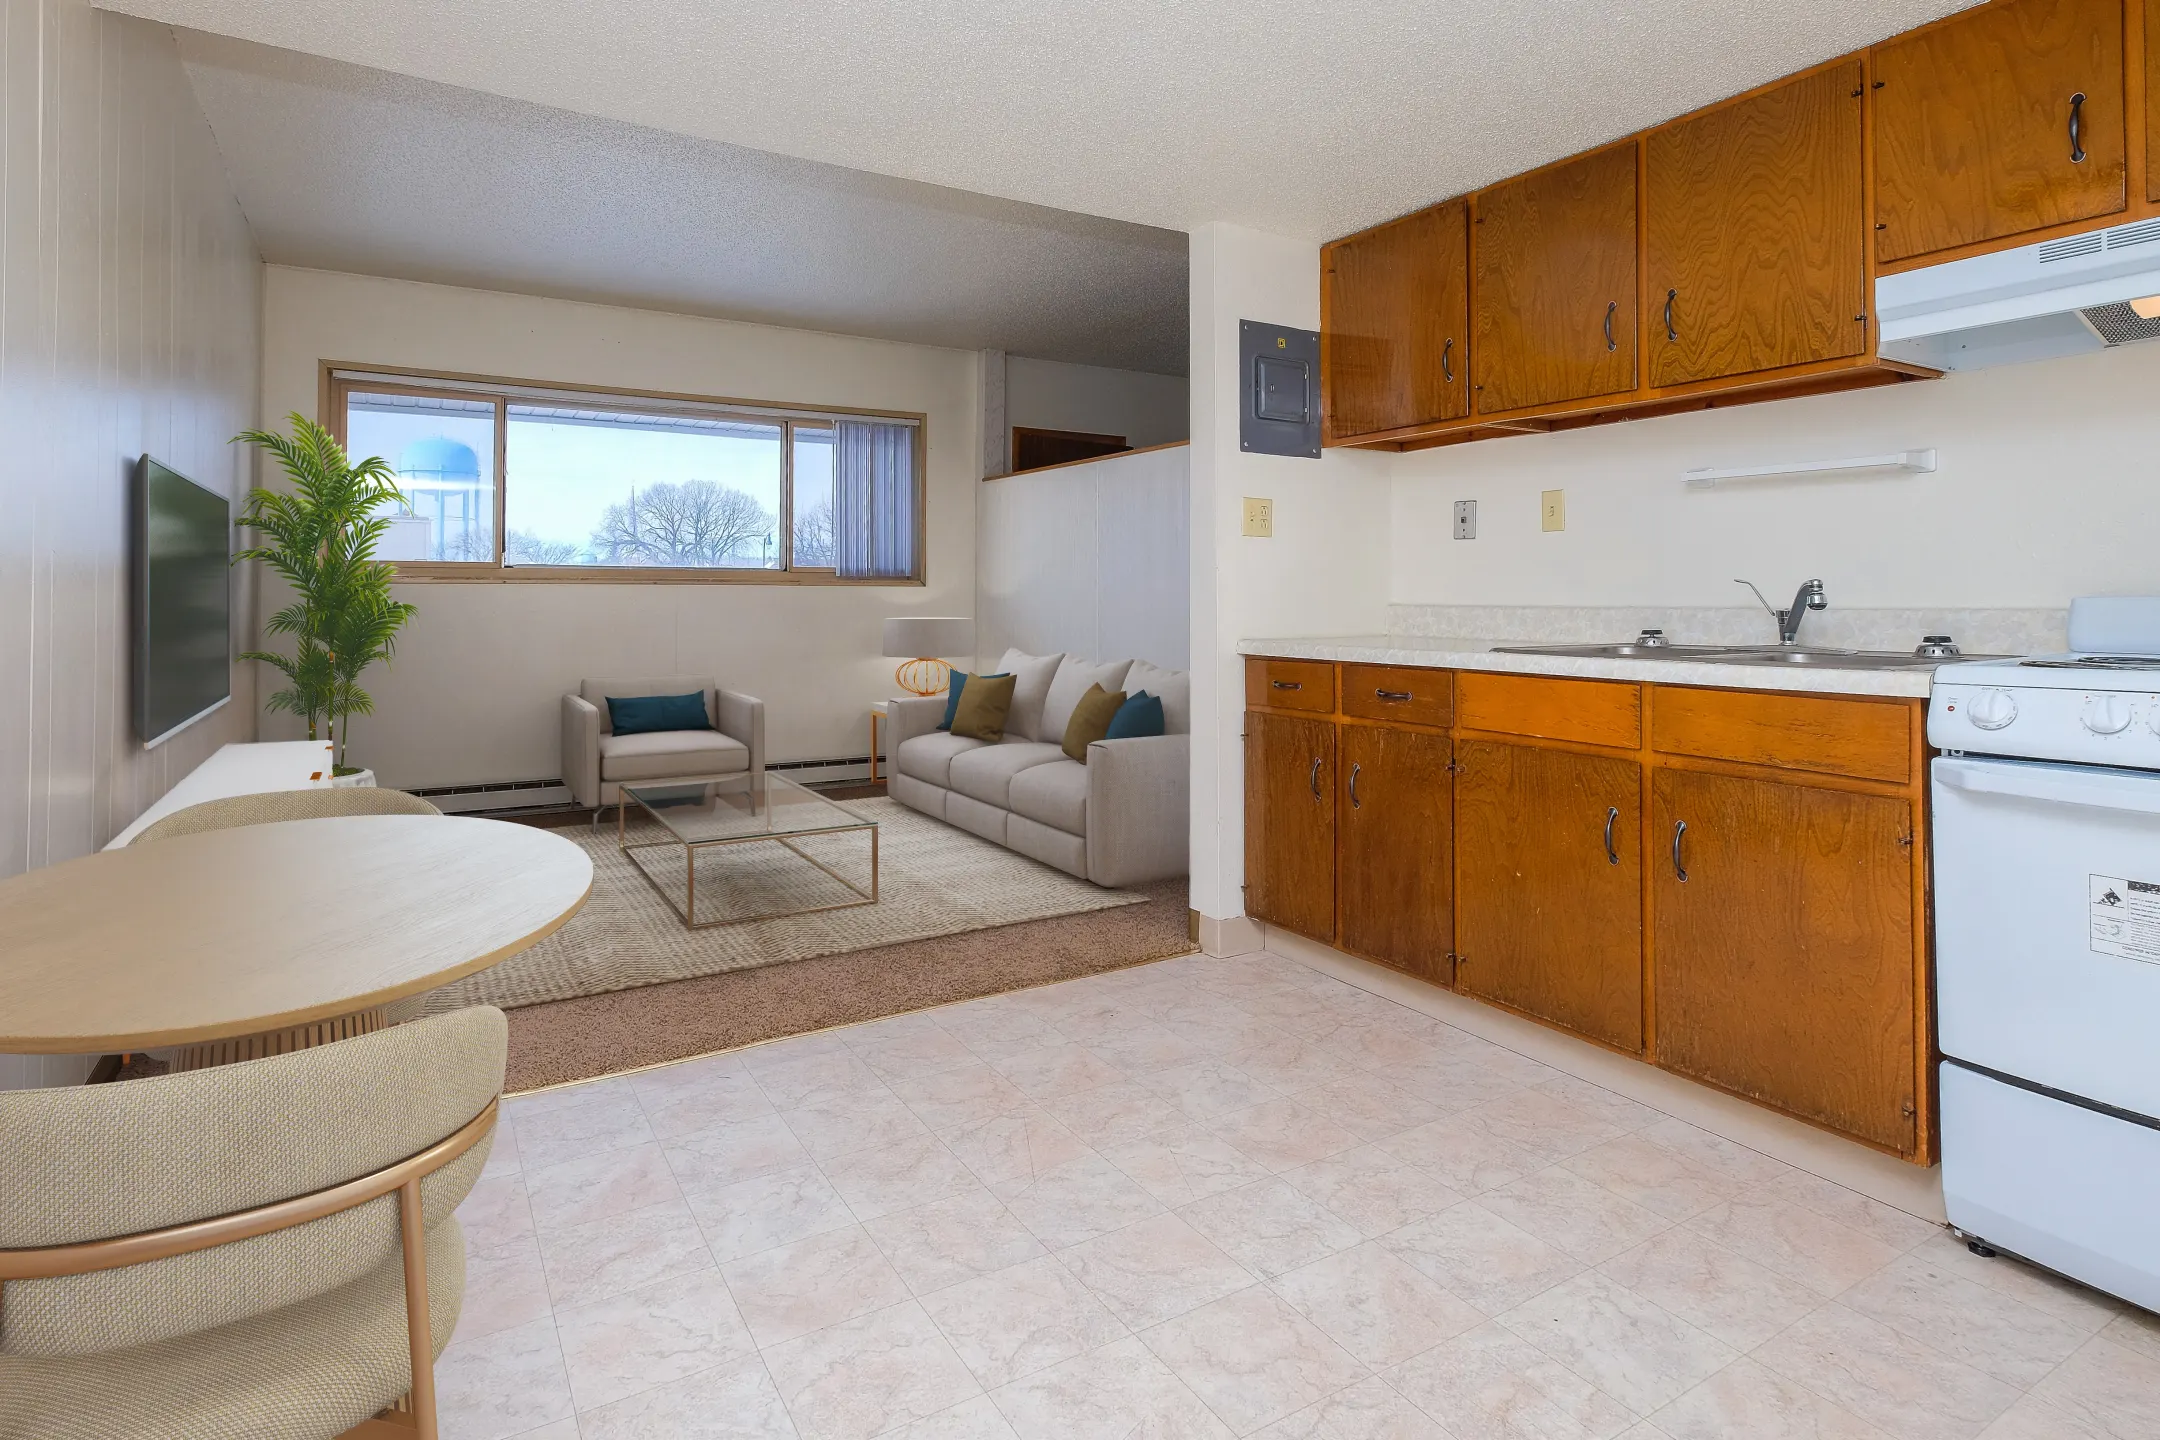 Living Room - Luxford Court Apartment Community - Fargo, ND